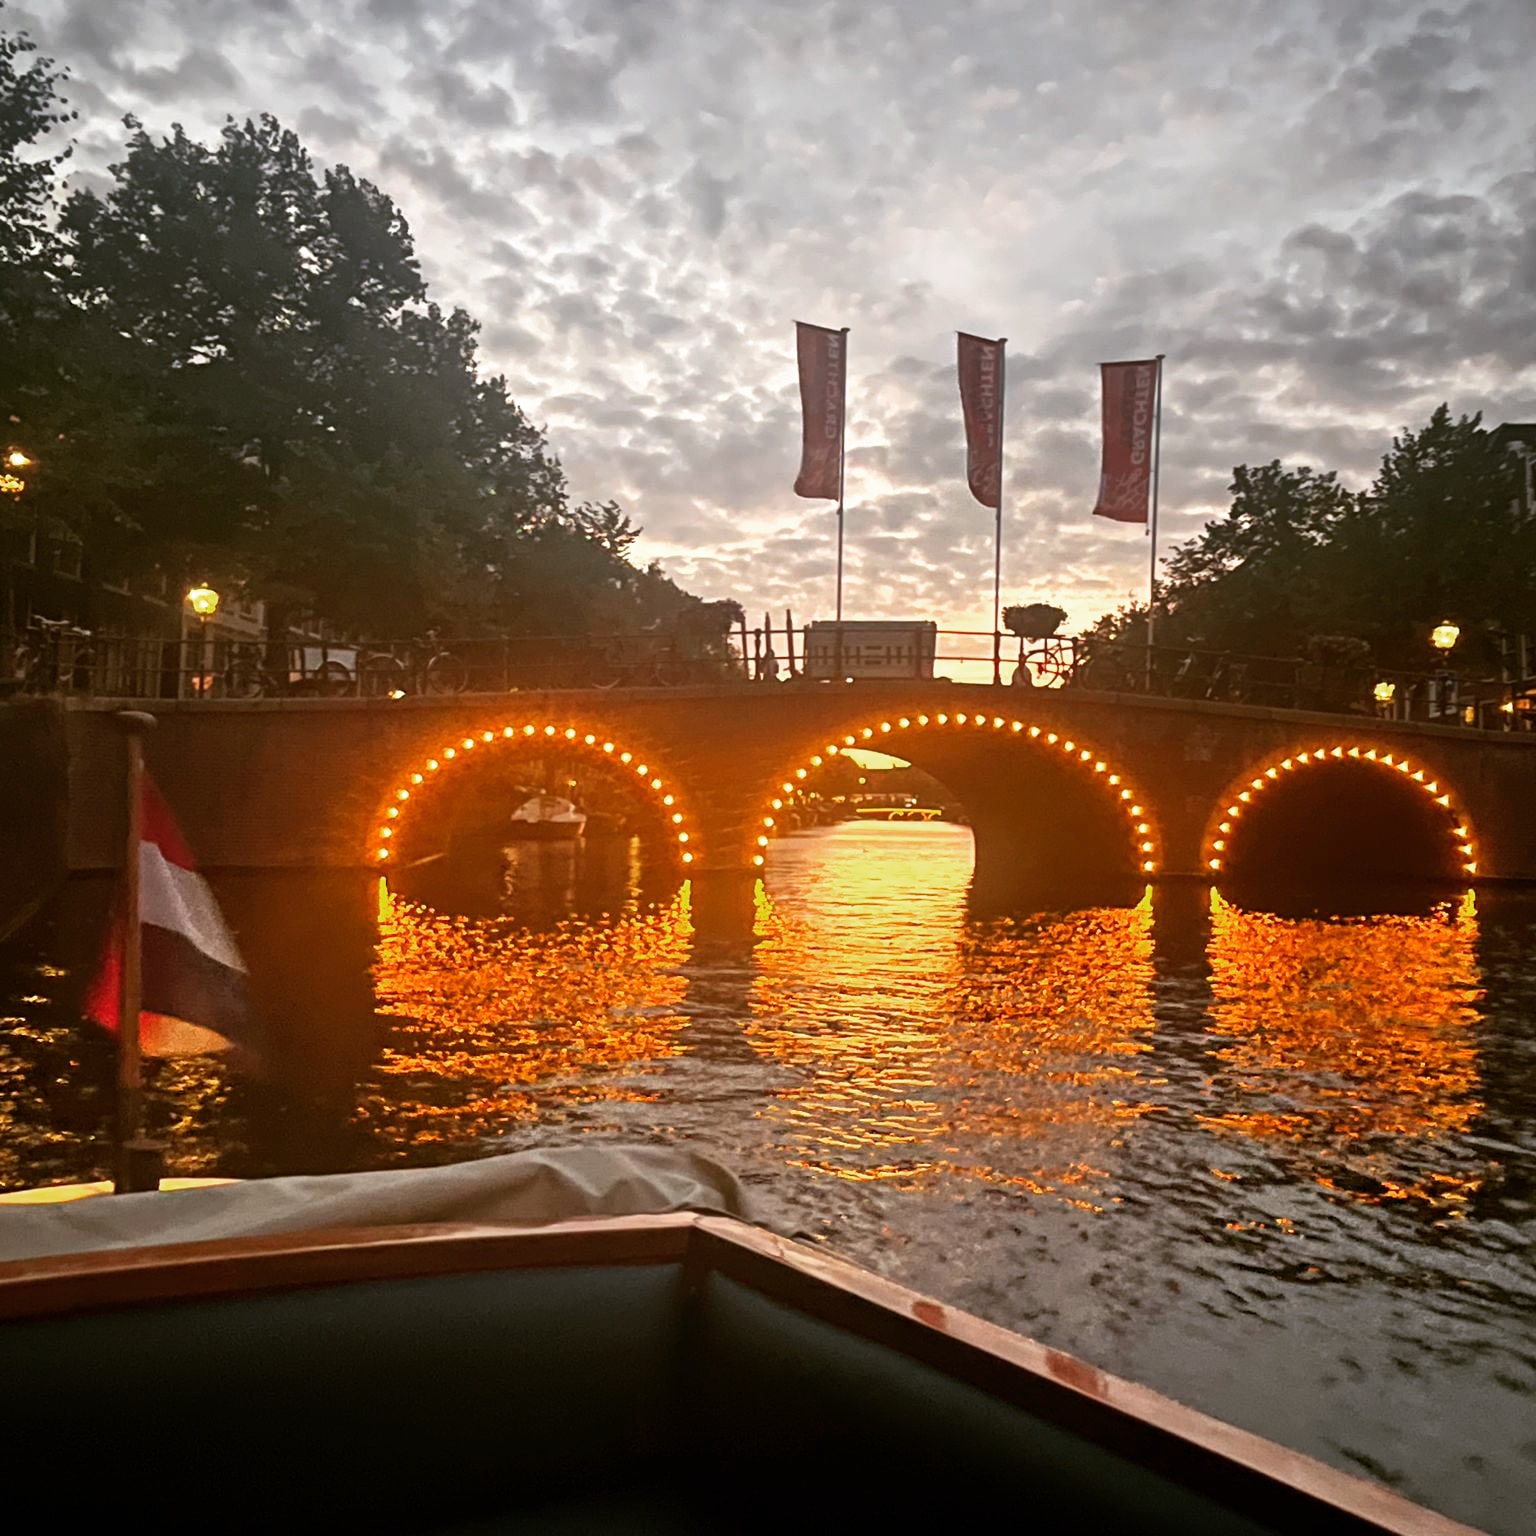 bootstour amsterdam abends